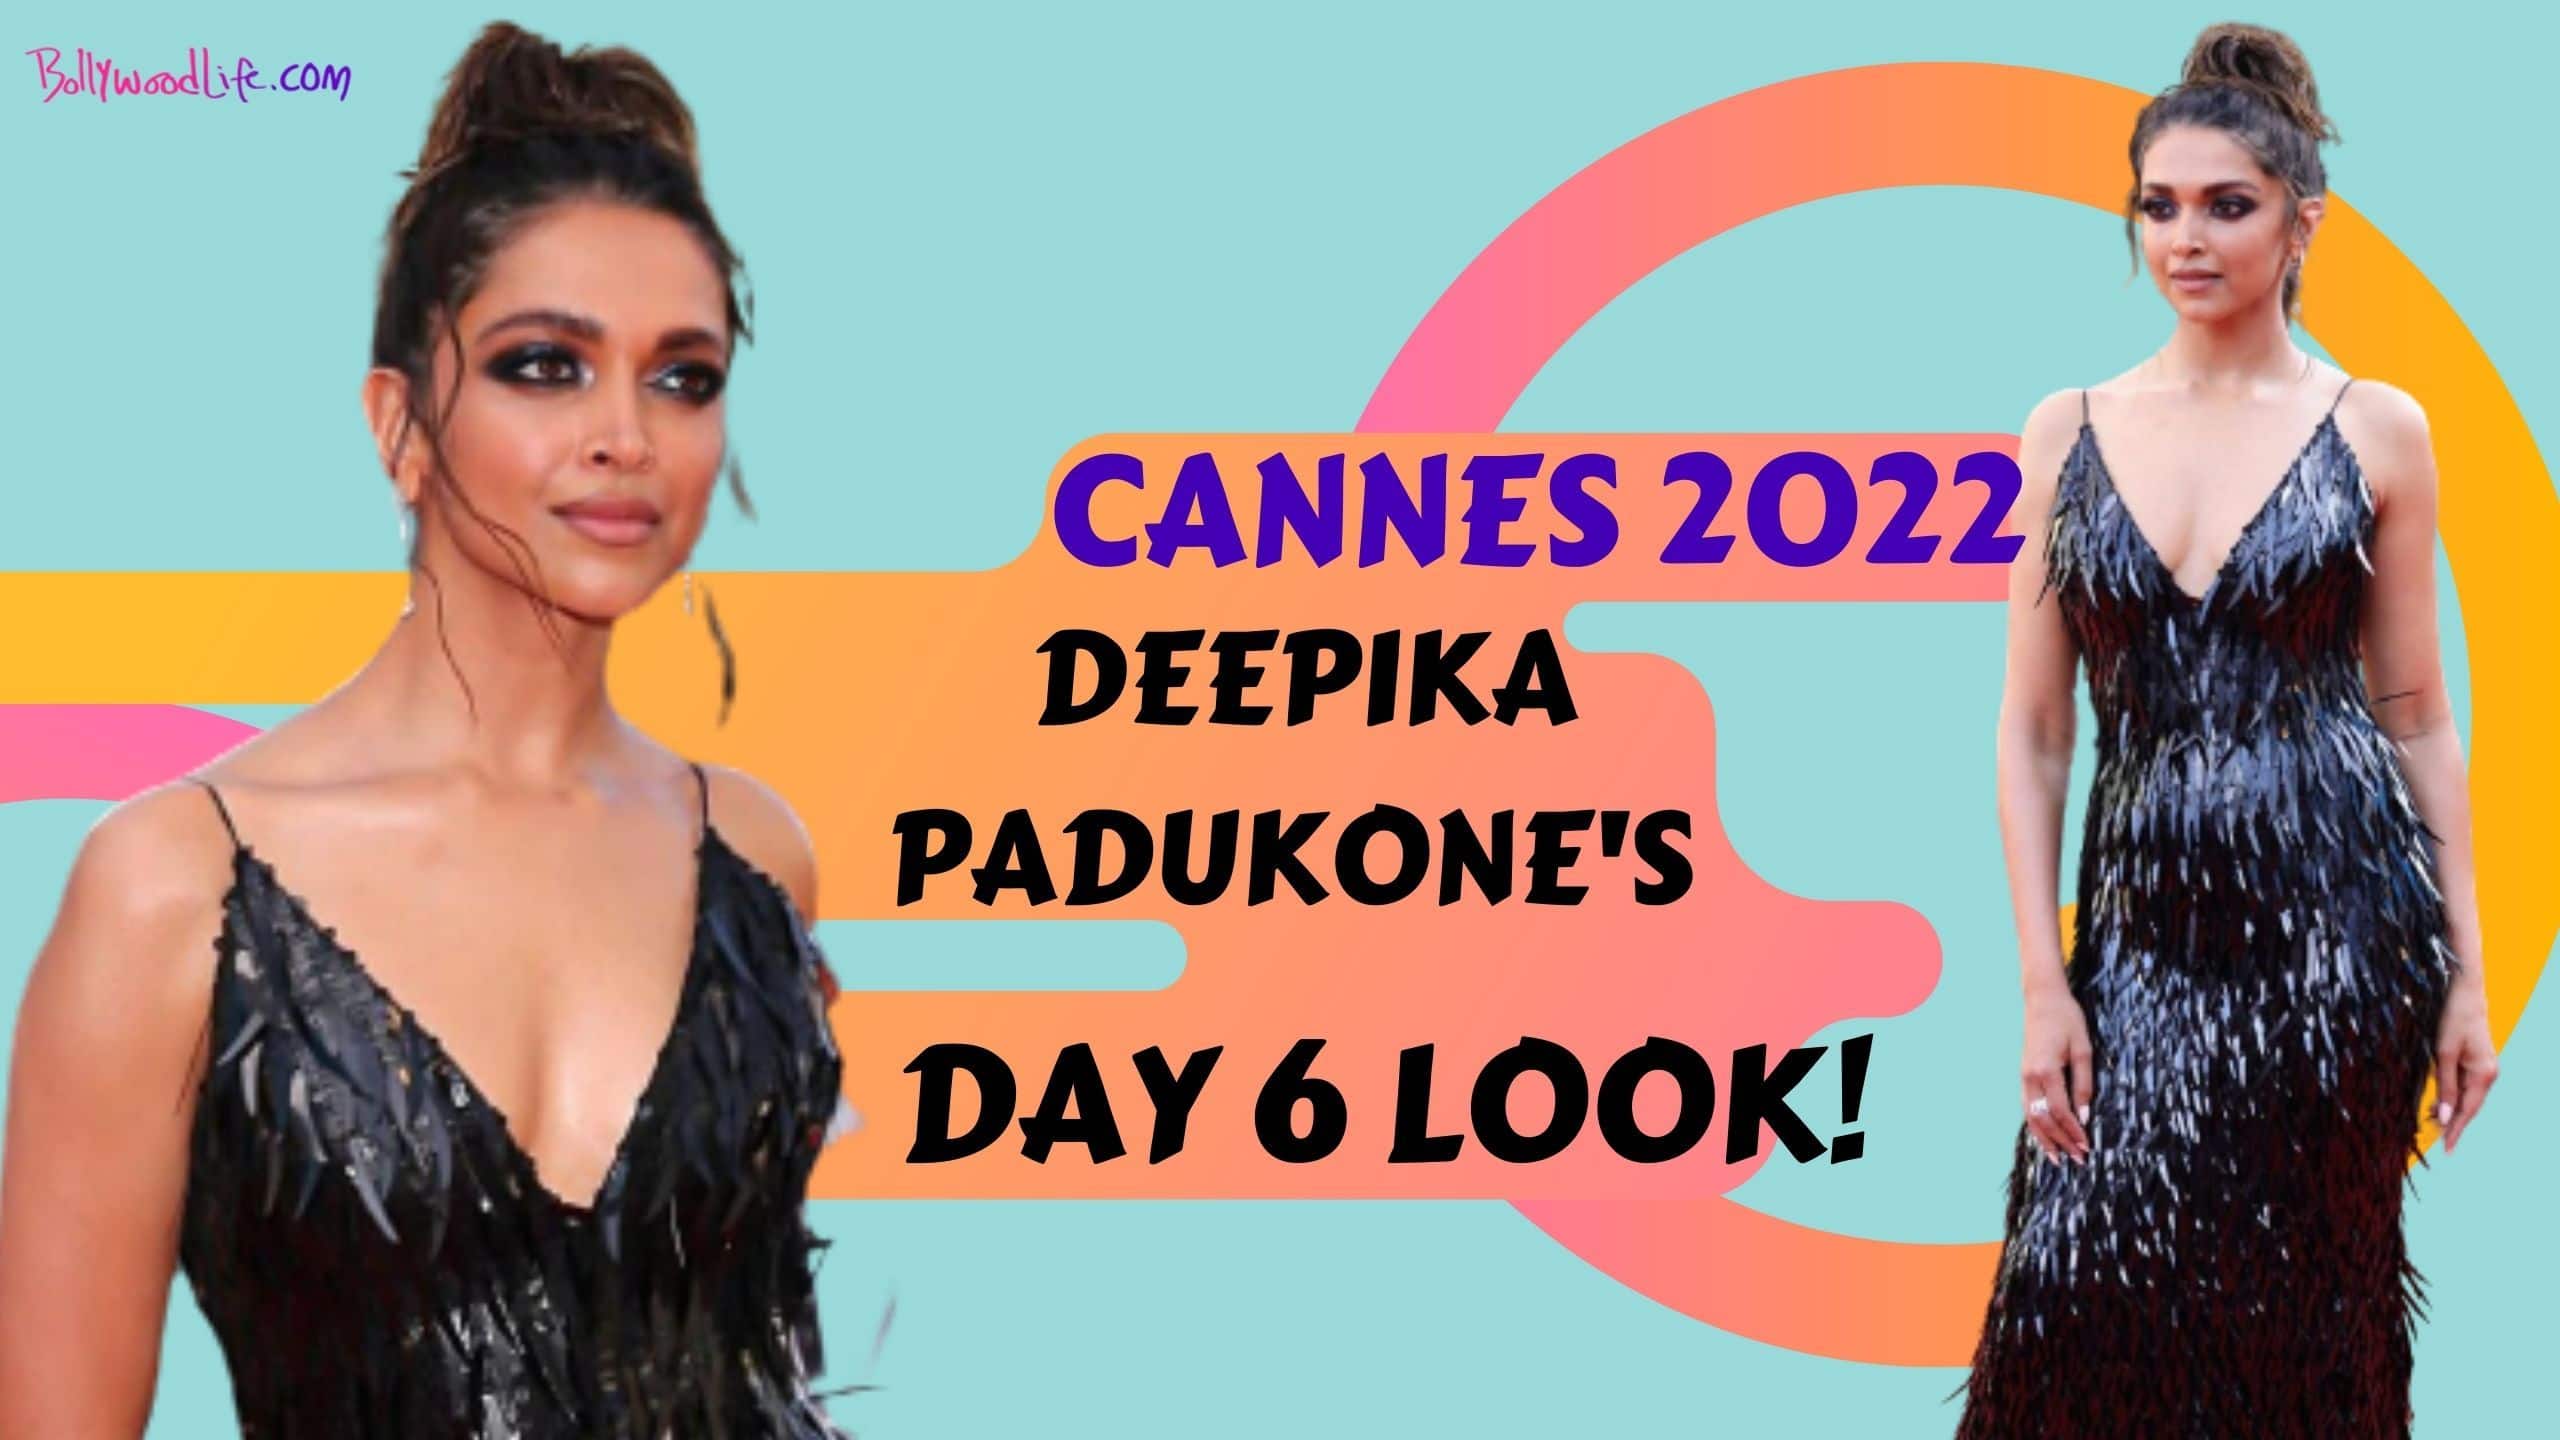 Bags Aholic - Cost of Deepika Padukone's Louis Vuitton bag can get you 30  grams of gold By FPJ Web Desk Deepika Padukone who always sports expensive  accessories, were spotted at the